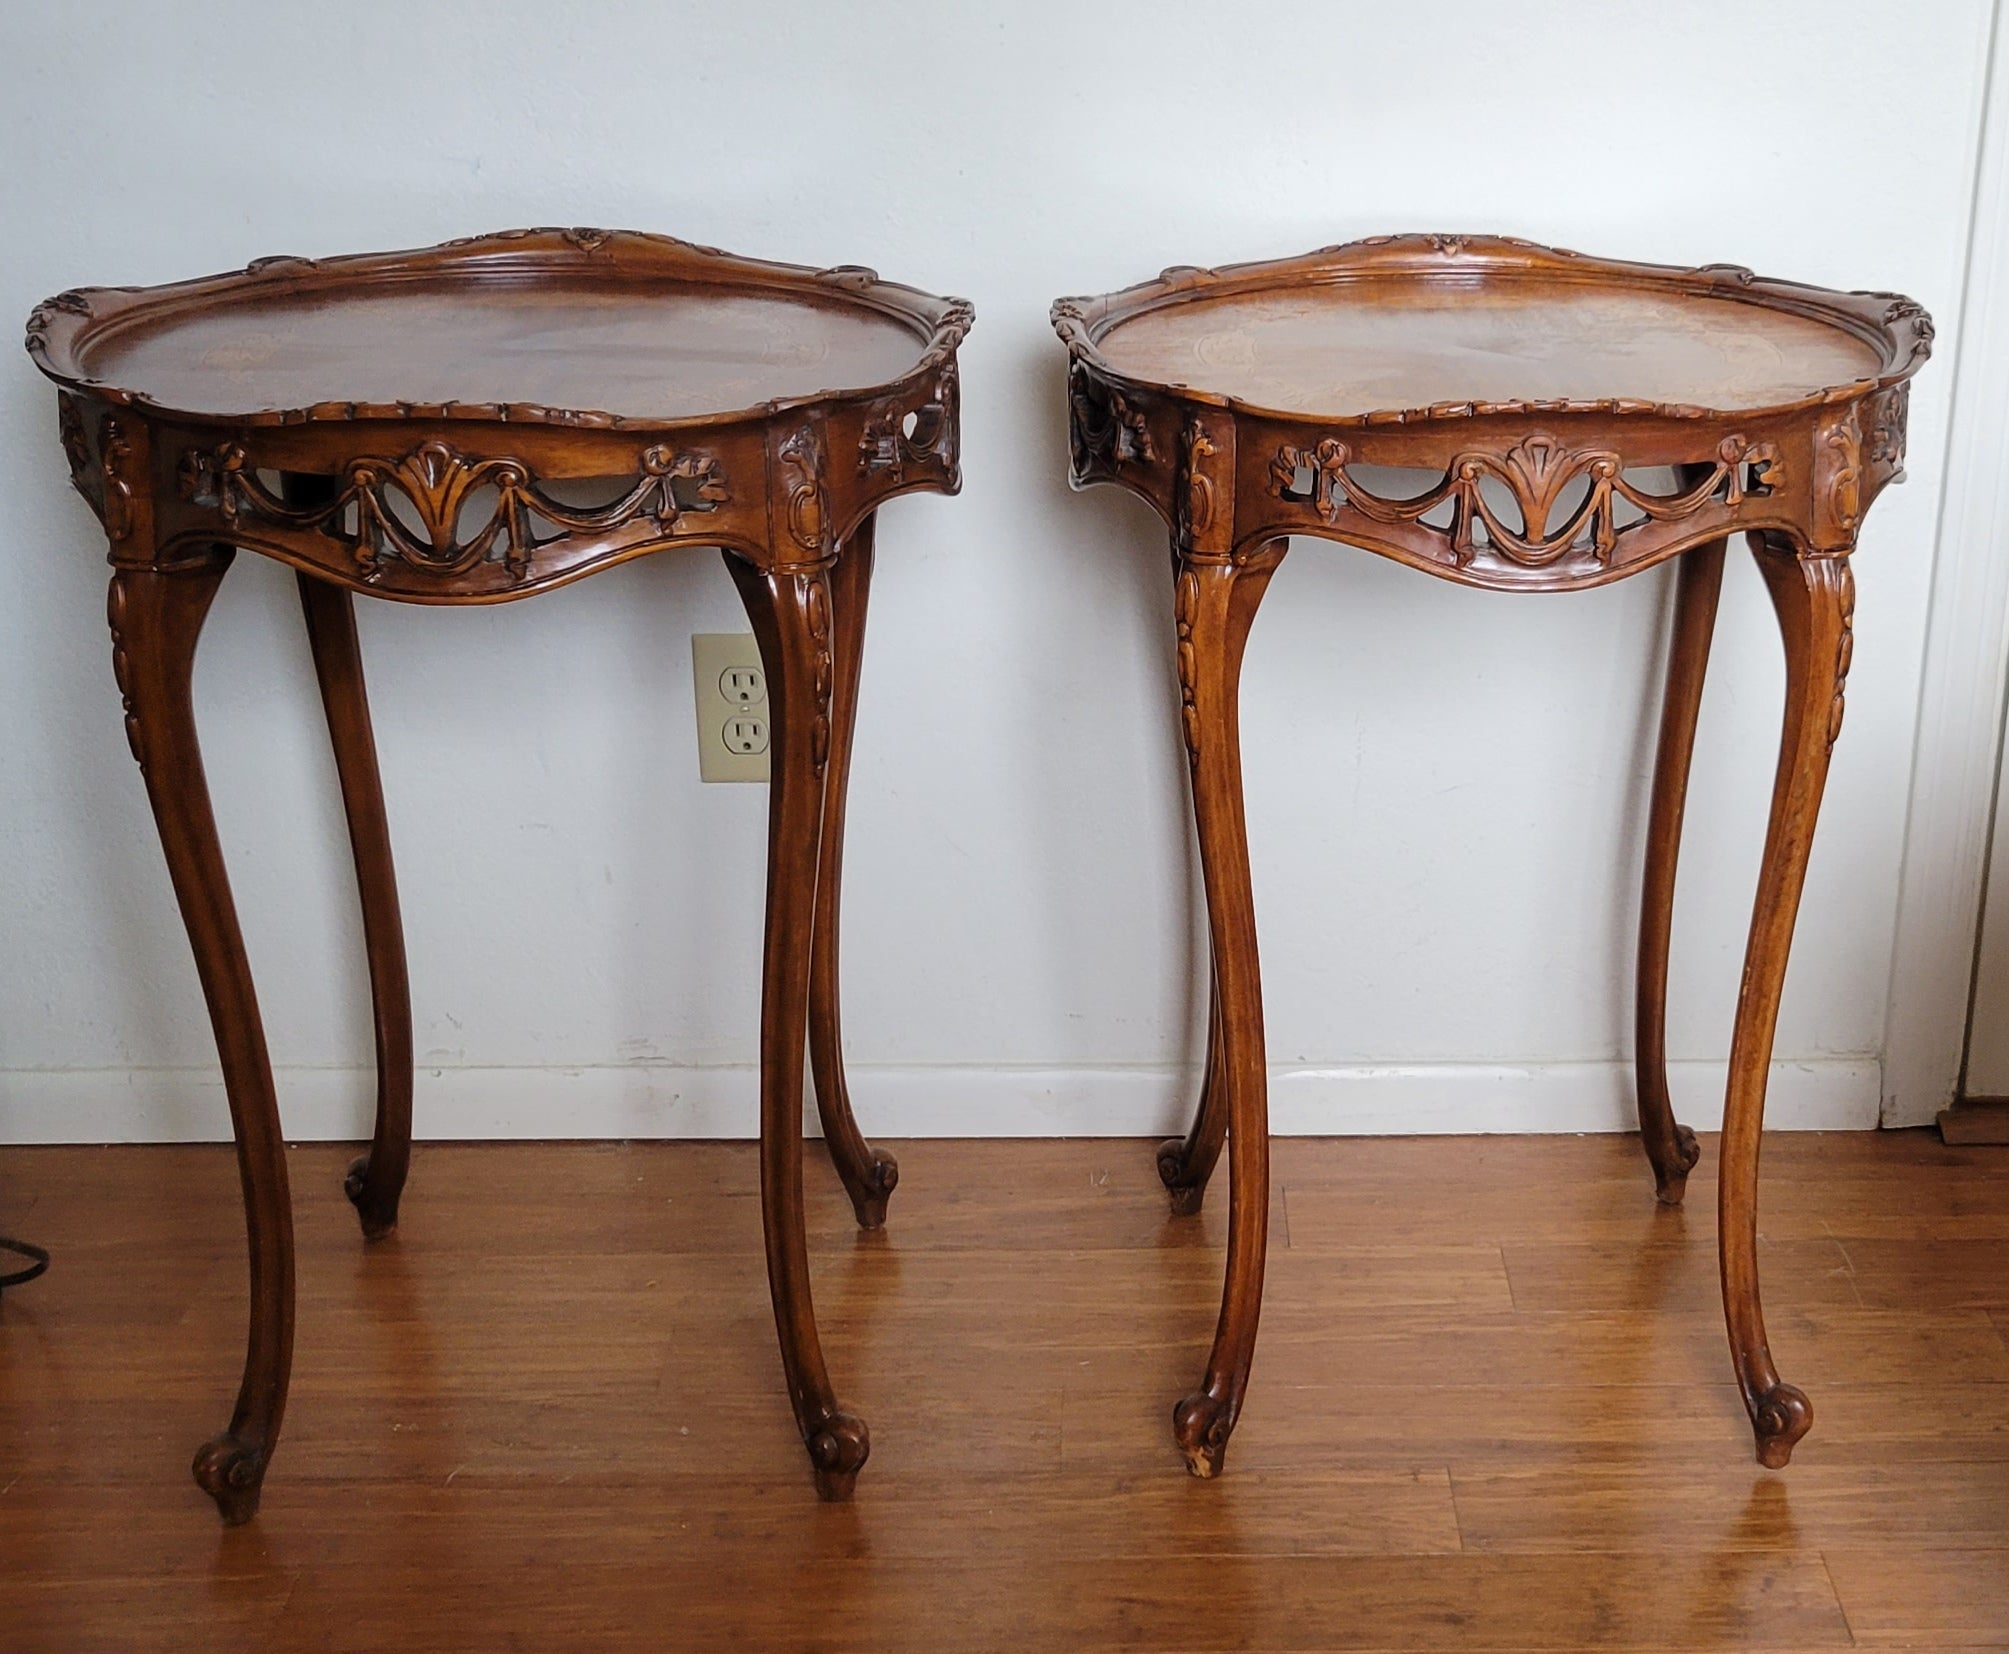 A set of (2) hand-carved walnut side tables with inlays and a delicate carvings around the cirumference. 
The tops of both tables are protected with polished edge glass. 
The inlays have some age-related wear. 
Both tables are very sturdy.

Please